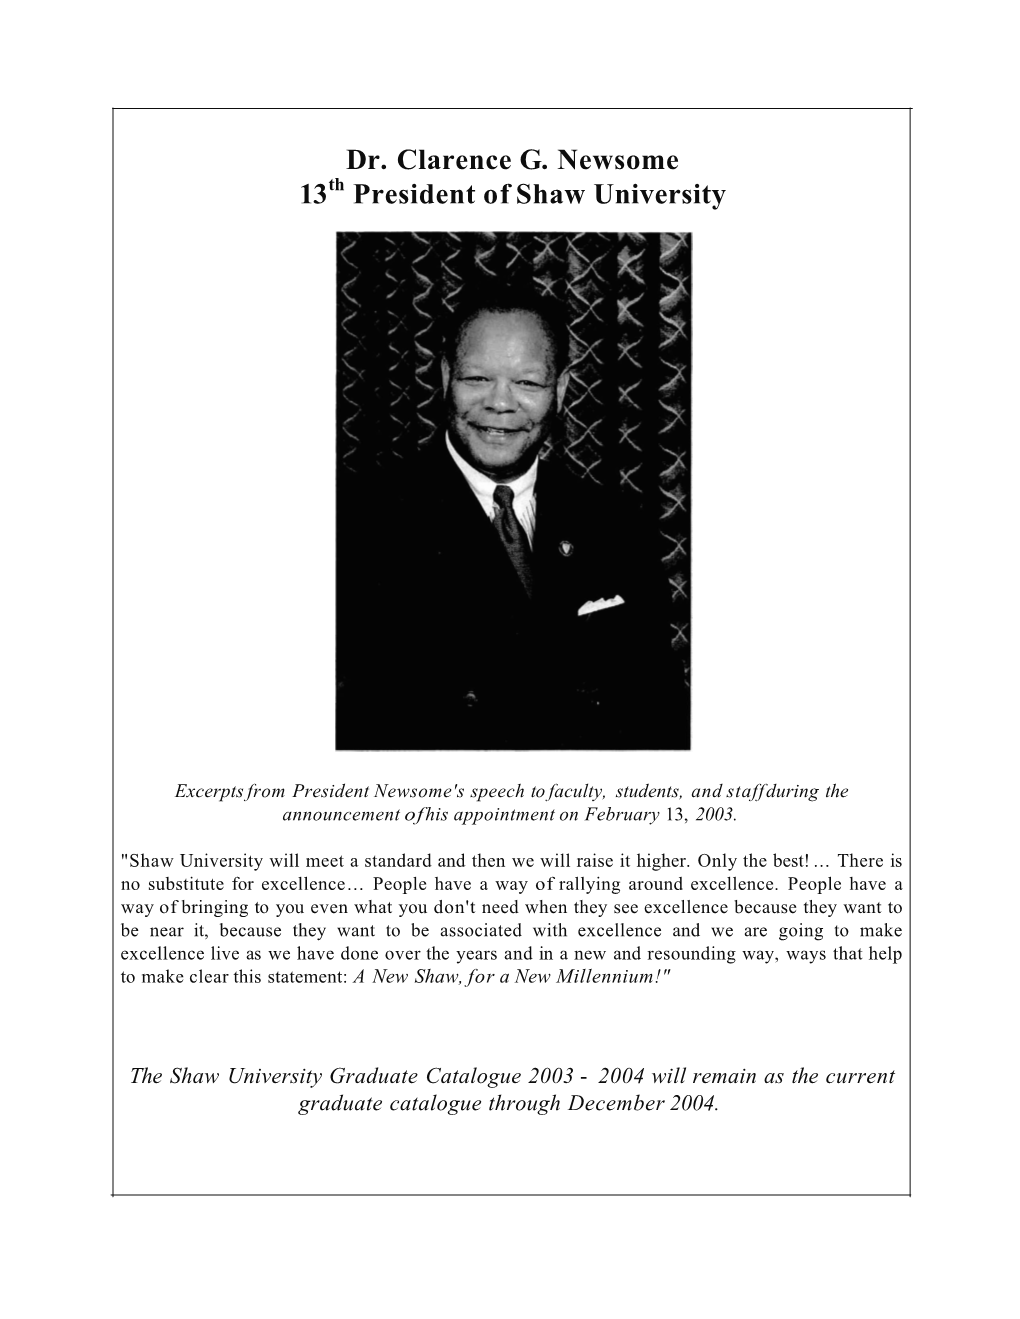 Dr. Clarence G. Newsome 13 President of Shaw University